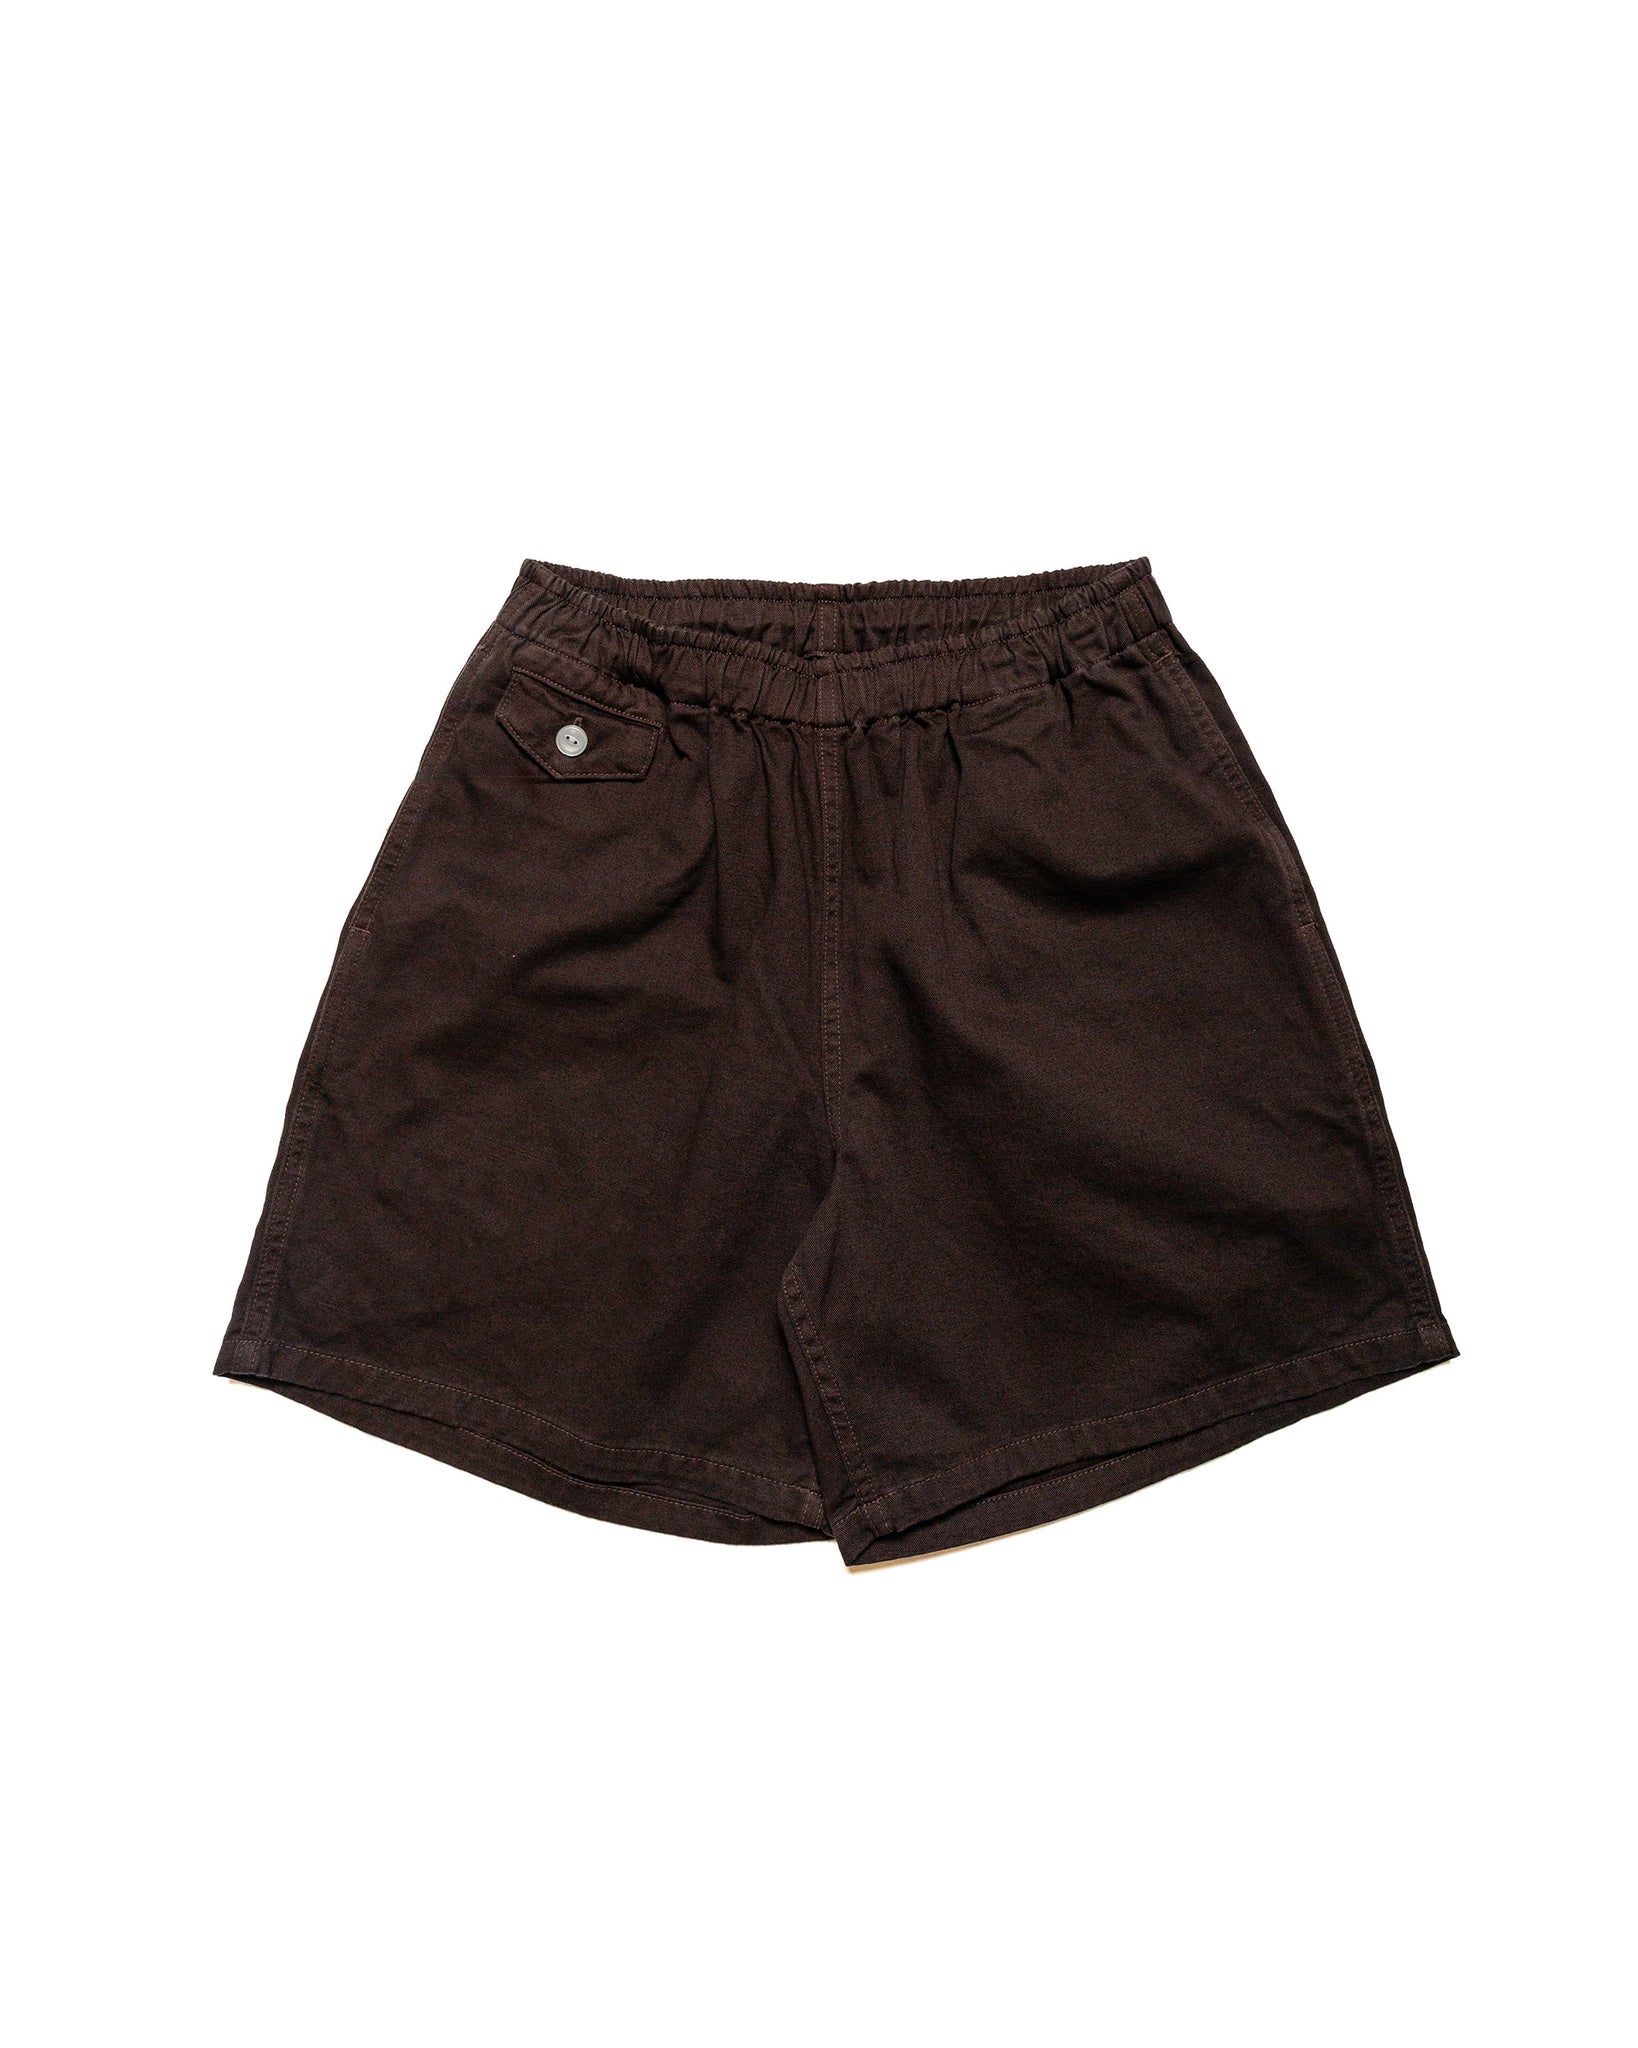 The Real McCoy's MP22015 Cotton Drill Swim Shorts (Over-Dyed) Black